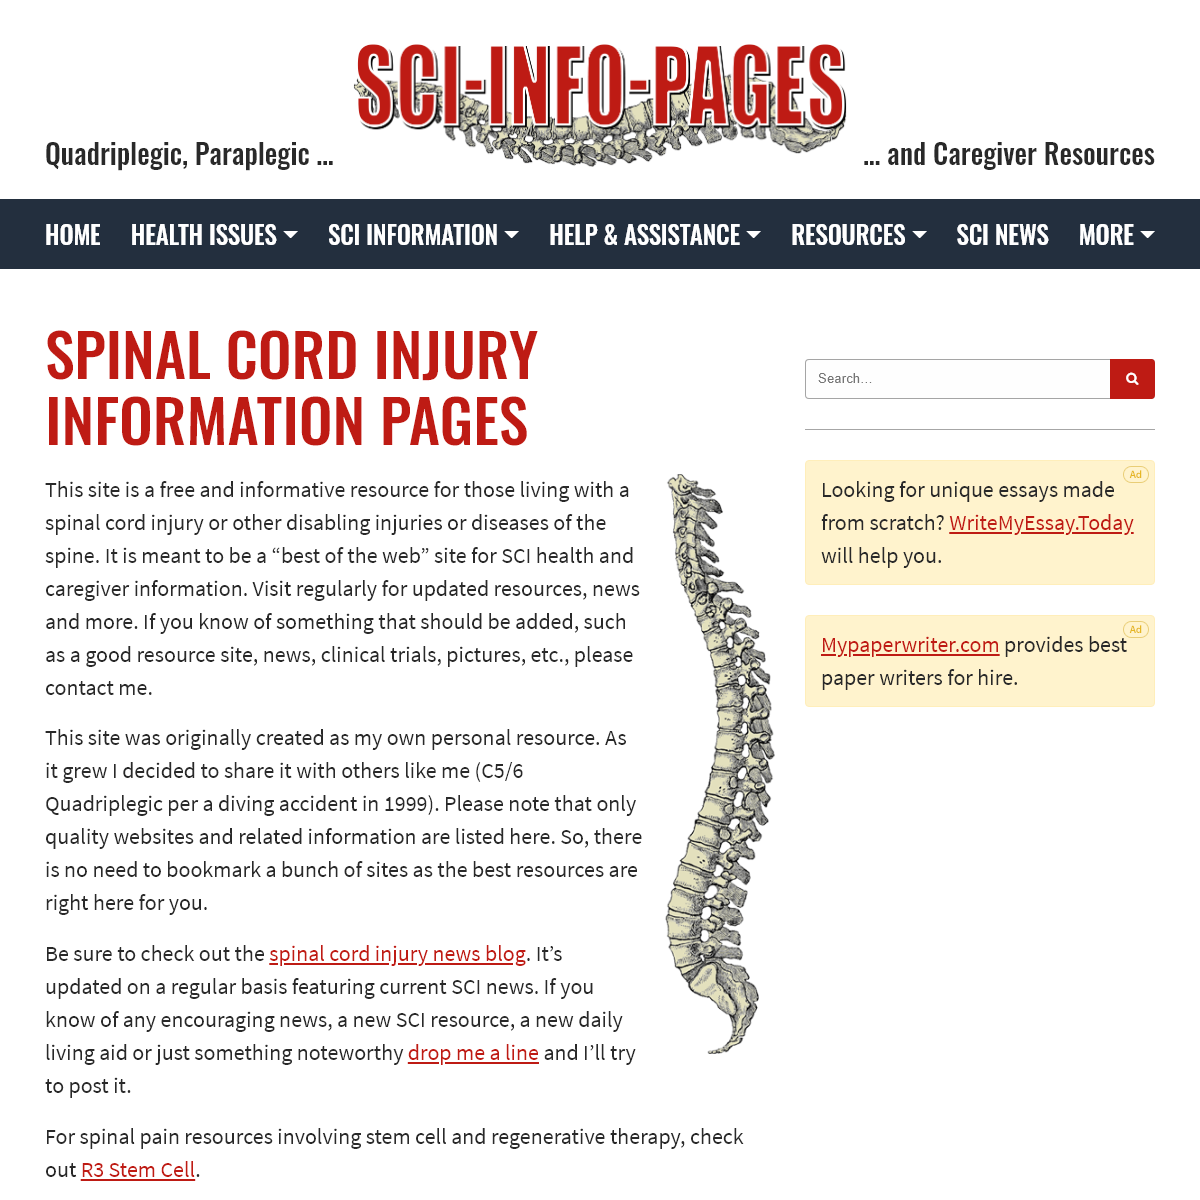 A complete backup of sci-info-pages.com